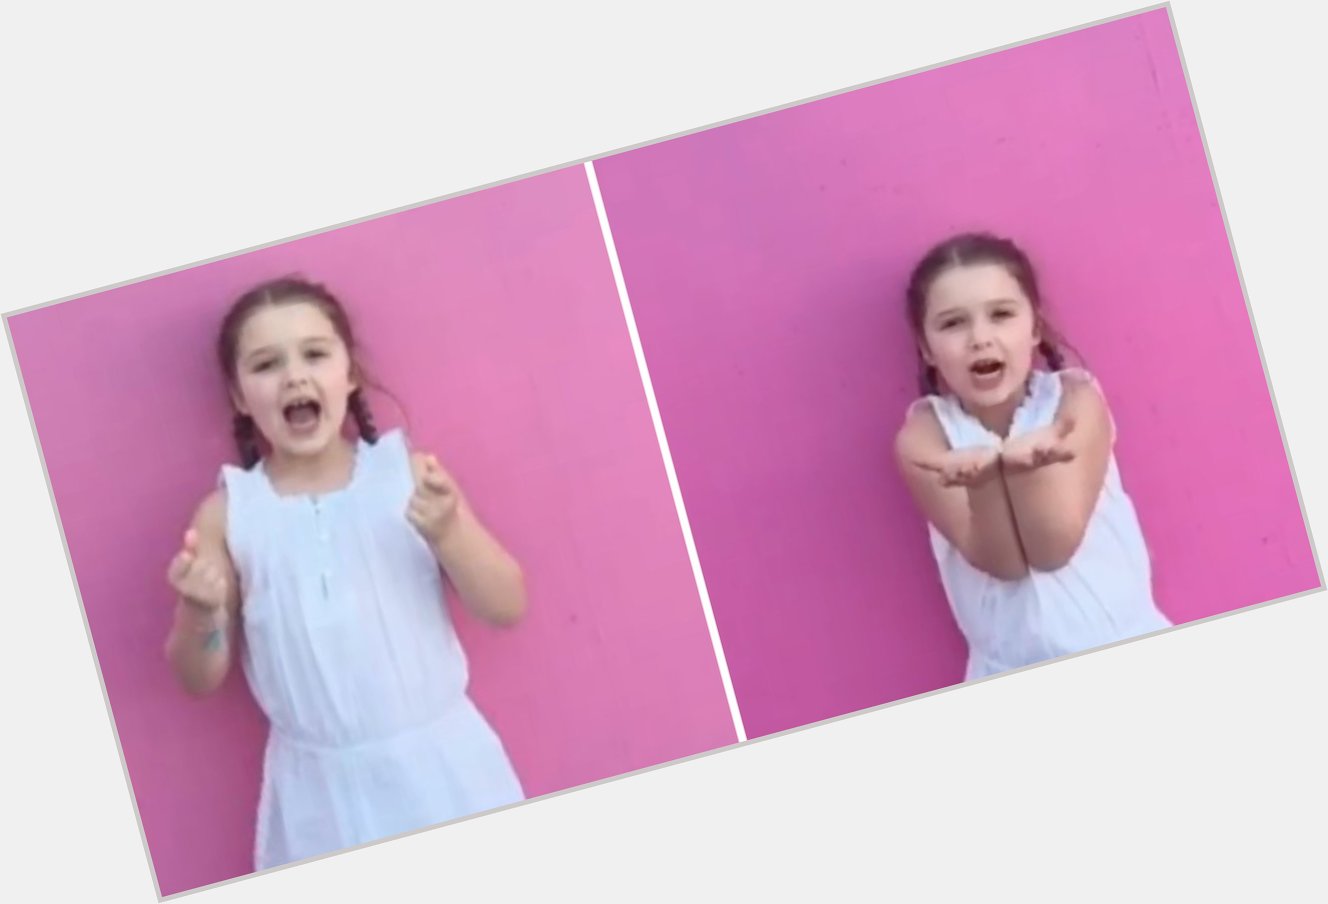 Victoria Beckham shares adorable video of 5-year-old Harper singing Happy Birthday  